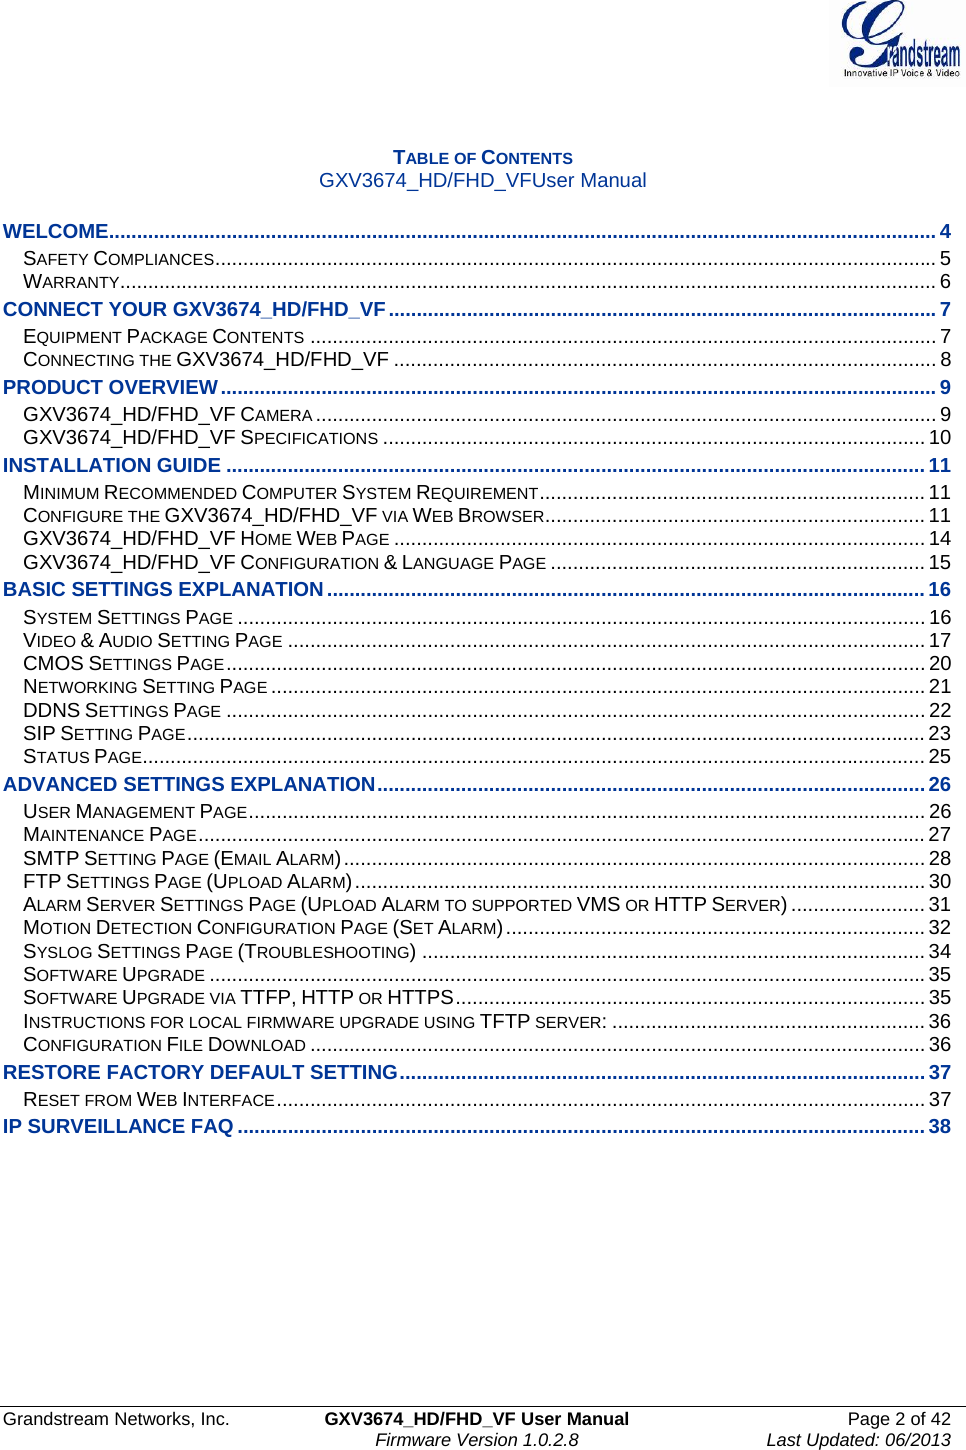  Grandstream Networks, Inc.  GXV3674_HD/FHD_VF User Manual  Page 2 of 42   Firmware Version 1.0.2.8  Last Updated: 06/2013    TABLE OF CONTENTS GXV3674_HD/FHD_VFUser Manual  WELCOME.................................................................................................................................................... 4SAFETY COMPLIANCES................................................................................................................................. 5WARRANTY.................................................................................................................................................. 6CONNECT YOUR GXV3674_HD/FHD_VF..................................................................................................7EQUIPMENT PACKAGE CONTENTS ................................................................................................................ 7CONNECTING THE GXV3674_HD/FHD_VF ................................................................................................. 8PRODUCT OVERVIEW................................................................................................................................ 9GXV3674_HD/FHD_VF CAMERA ............................................................................................................... 9GXV3674_HD/FHD_VF SPECIFICATIONS ................................................................................................. 10INSTALLATION GUIDE .............................................................................................................................11MINIMUM RECOMMENDED COMPUTER SYSTEM REQUIREMENT..................................................................... 11CONFIGURE THE GXV3674_HD/FHD_VF VIA WEB BROWSER.................................................................... 11GXV3674_HD/FHD_VF HOME WEB PAGE ............................................................................................... 14GXV3674_HD/FHD_VF CONFIGURATION &amp; LANGUAGE PAGE ................................................................... 15BASIC SETTINGS EXPLANATION...........................................................................................................16SYSTEM SETTINGS PAGE ........................................................................................................................... 16VIDEO &amp; AUDIO SETTING PAGE .................................................................................................................. 17CMOS SETTINGS PAGE............................................................................................................................. 20NETWORKING SETTING PAGE ..................................................................................................................... 21DDNS SETTINGS PAGE ............................................................................................................................. 22SIP SETTING PAGE.................................................................................................................................... 23STATUS PAGE............................................................................................................................................ 25ADVANCED SETTINGS EXPLANATION..................................................................................................26USER MANAGEMENT PAGE......................................................................................................................... 26MAINTENANCE PAGE.................................................................................................................................. 27SMTP SETTING PAGE (EMAIL ALARM)........................................................................................................ 28FTP SETTINGS PAGE (UPLOAD ALARM)...................................................................................................... 30ALARM SERVER SETTINGS PAGE (UPLOAD ALARM TO SUPPORTED VMS OR HTTP SERVER) ........................ 31MOTION DETECTION CONFIGURATION PAGE (SET ALARM)........................................................................... 32SYSLOG SETTINGS PAGE (TROUBLESHOOTING) .......................................................................................... 34SOFTWARE UPGRADE ................................................................................................................................35SOFTWARE UPGRADE VIA TTFP, HTTP OR HTTPS.................................................................................... 35INSTRUCTIONS FOR LOCAL FIRMWARE UPGRADE USING TFTP SERVER: ........................................................ 36CONFIGURATION FILE DOWNLOAD .............................................................................................................. 36RESTORE FACTORY DEFAULT SETTING..............................................................................................37RESET FROM WEB INTERFACE.................................................................................................................... 37IP SURVEILLANCE FAQ ...........................................................................................................................38      